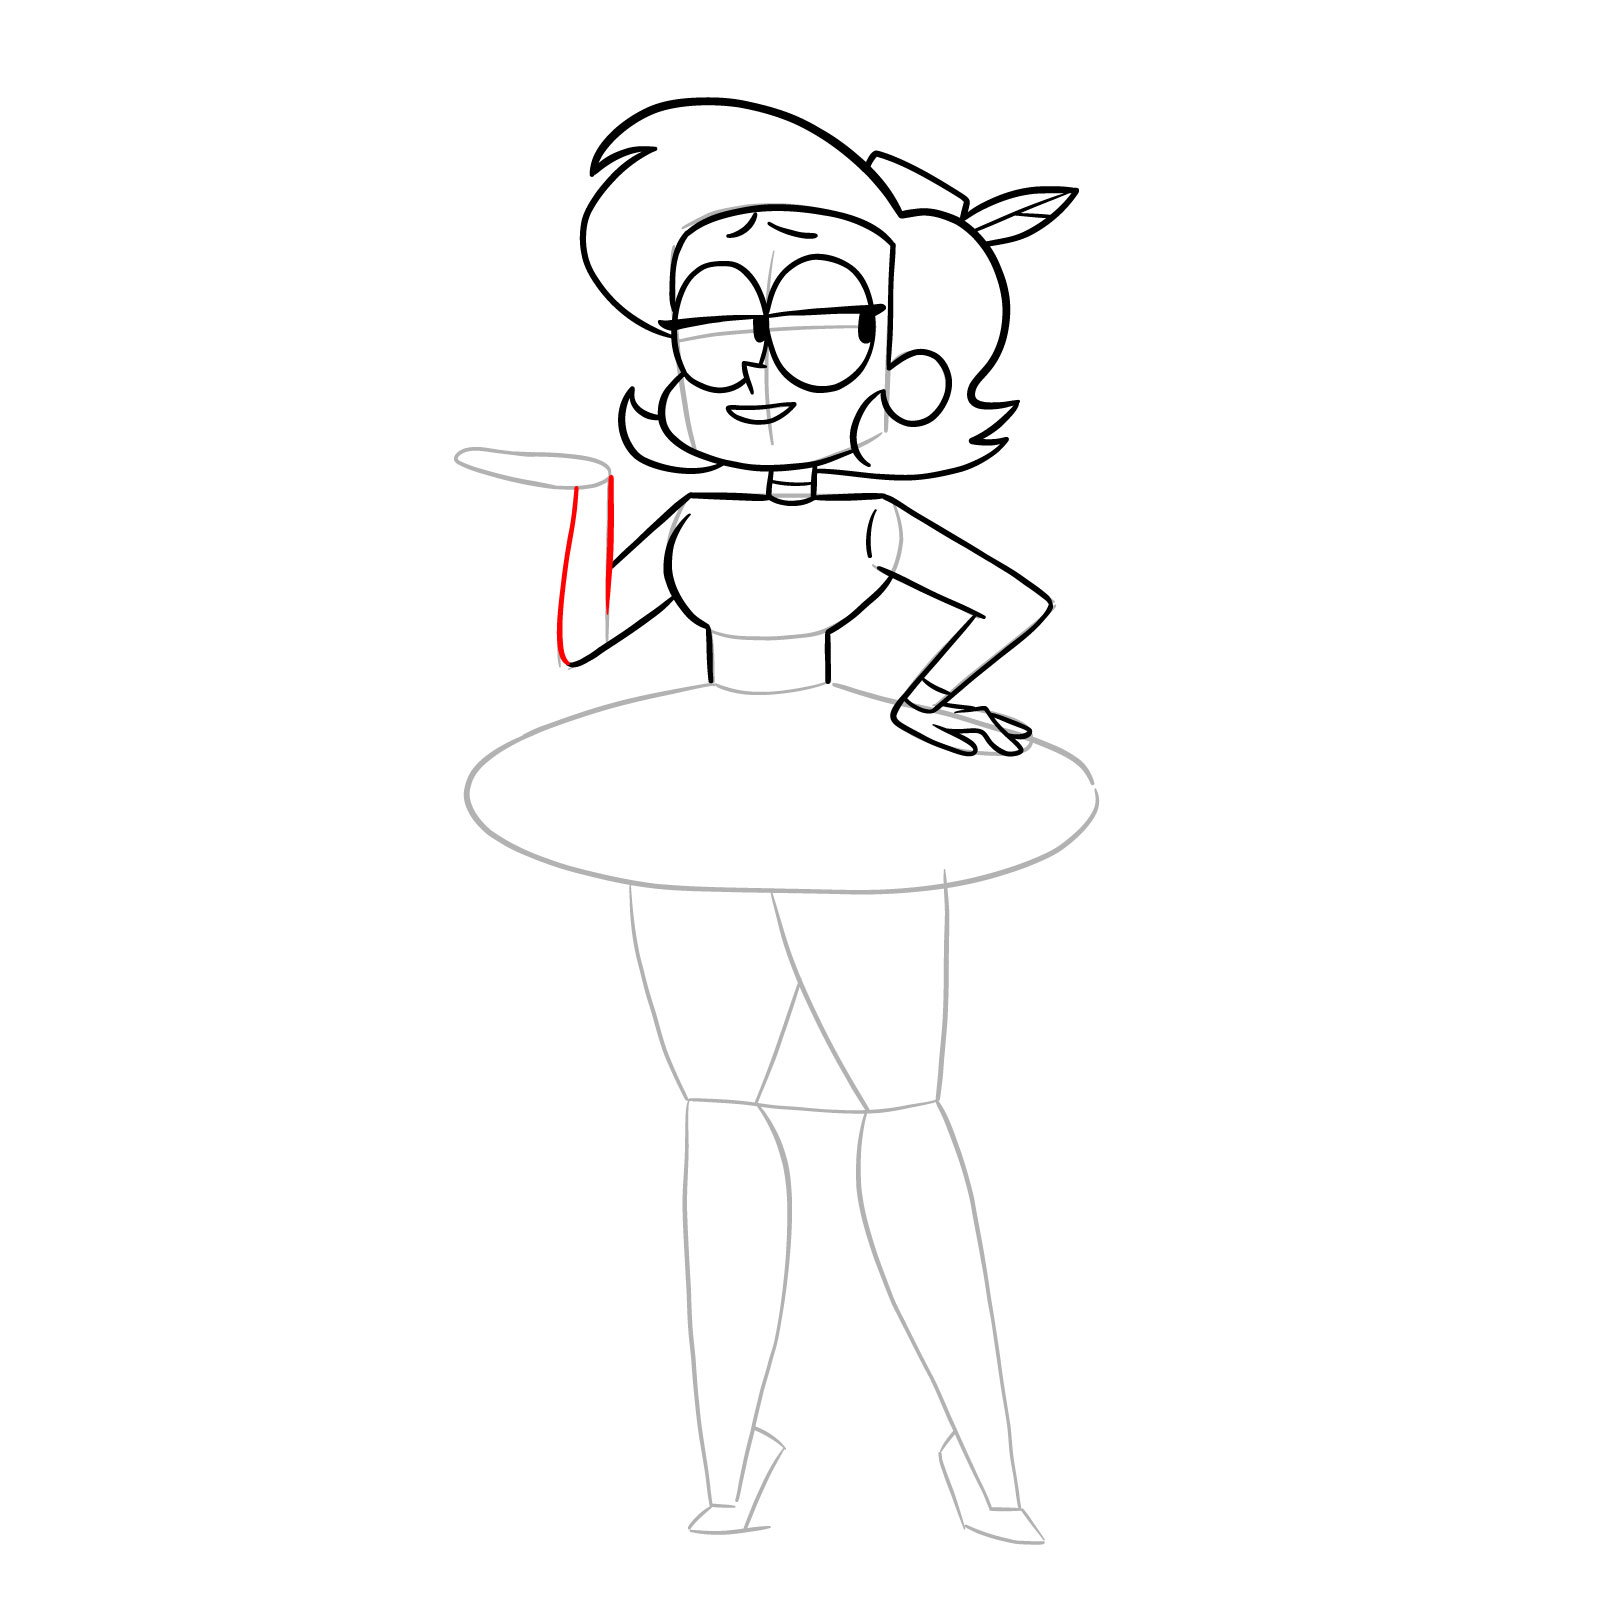 How to draw Elodie from OK K.O.! - step 22